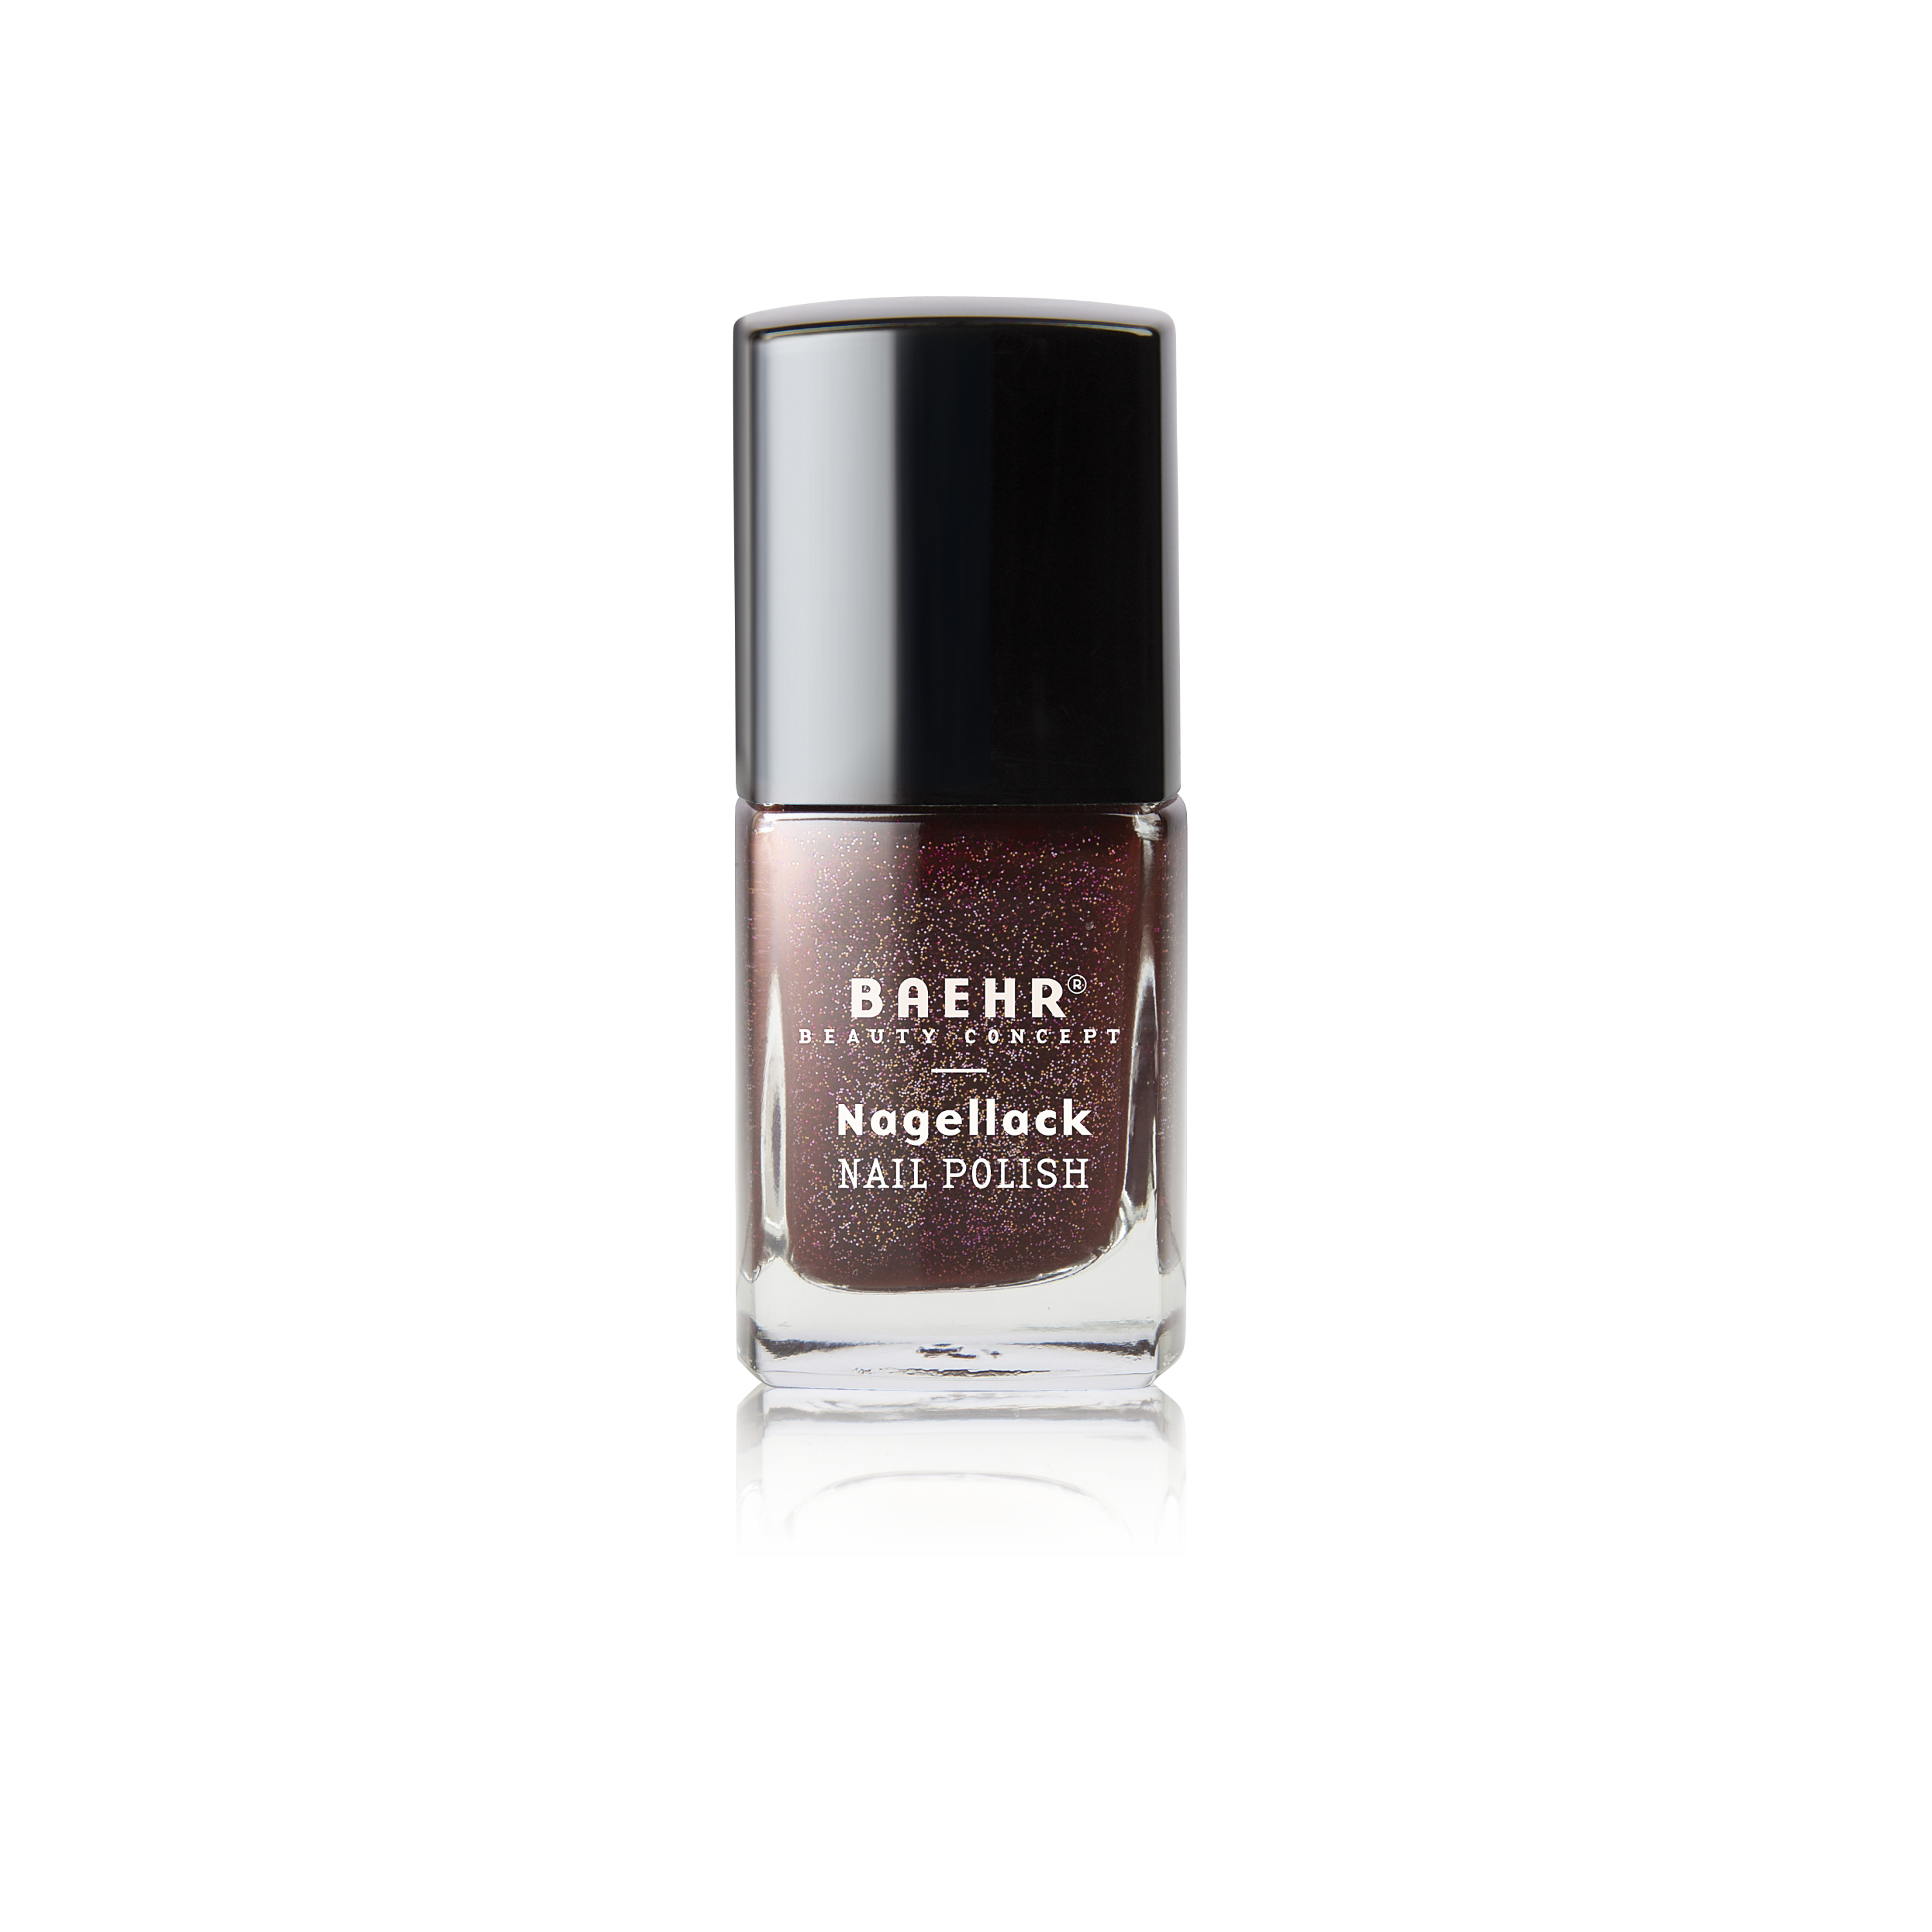 BAEHR BEAUTY CONCEPT - NAILS Nagellack sand brombeer 11 ml